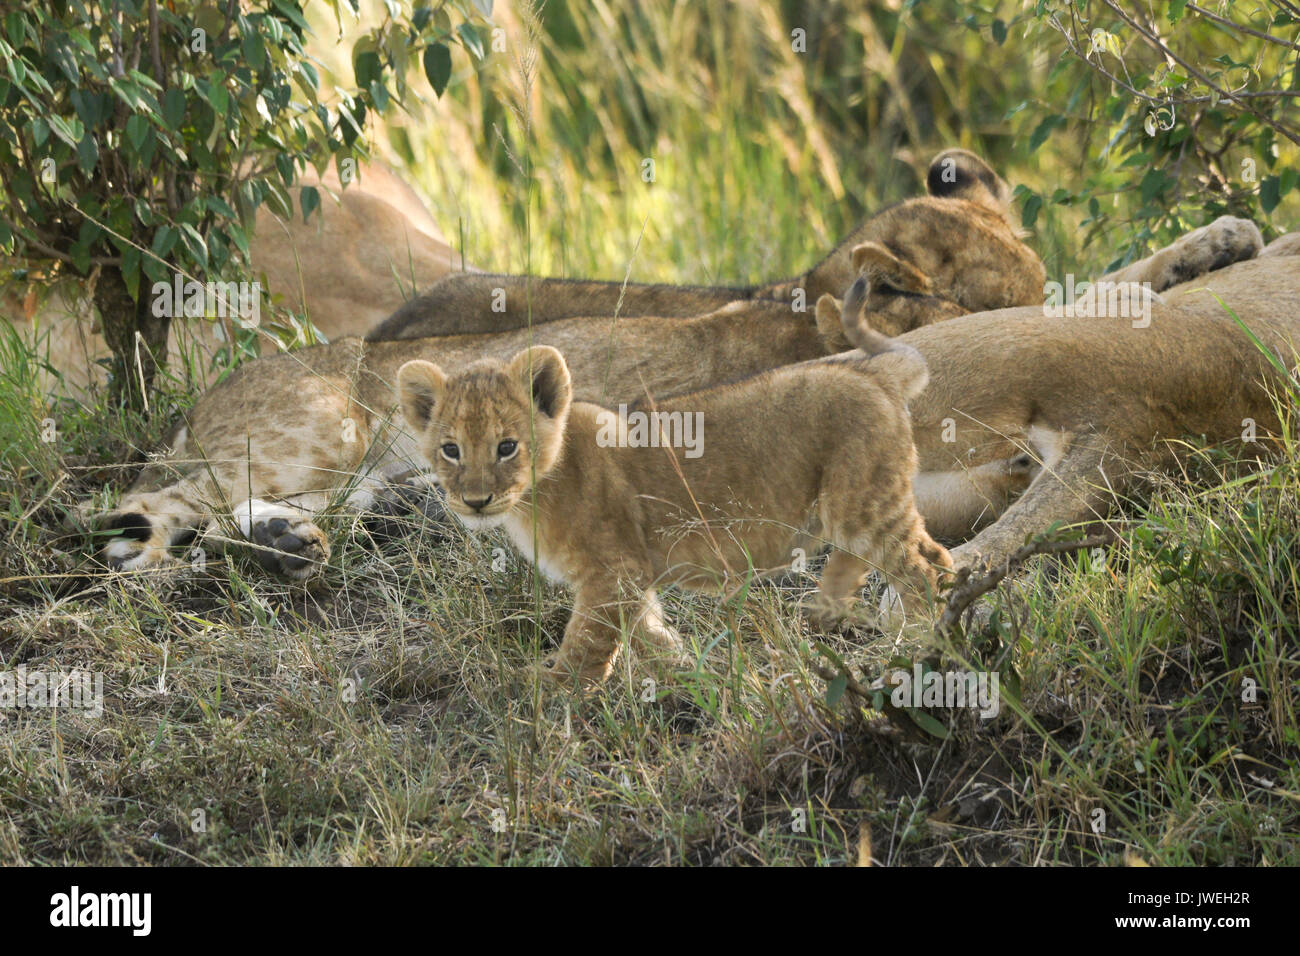 Tiny lion cub exploring while the rest of the pride sleeps, Masai Mara Game Reserve, Kenya Stock Photo